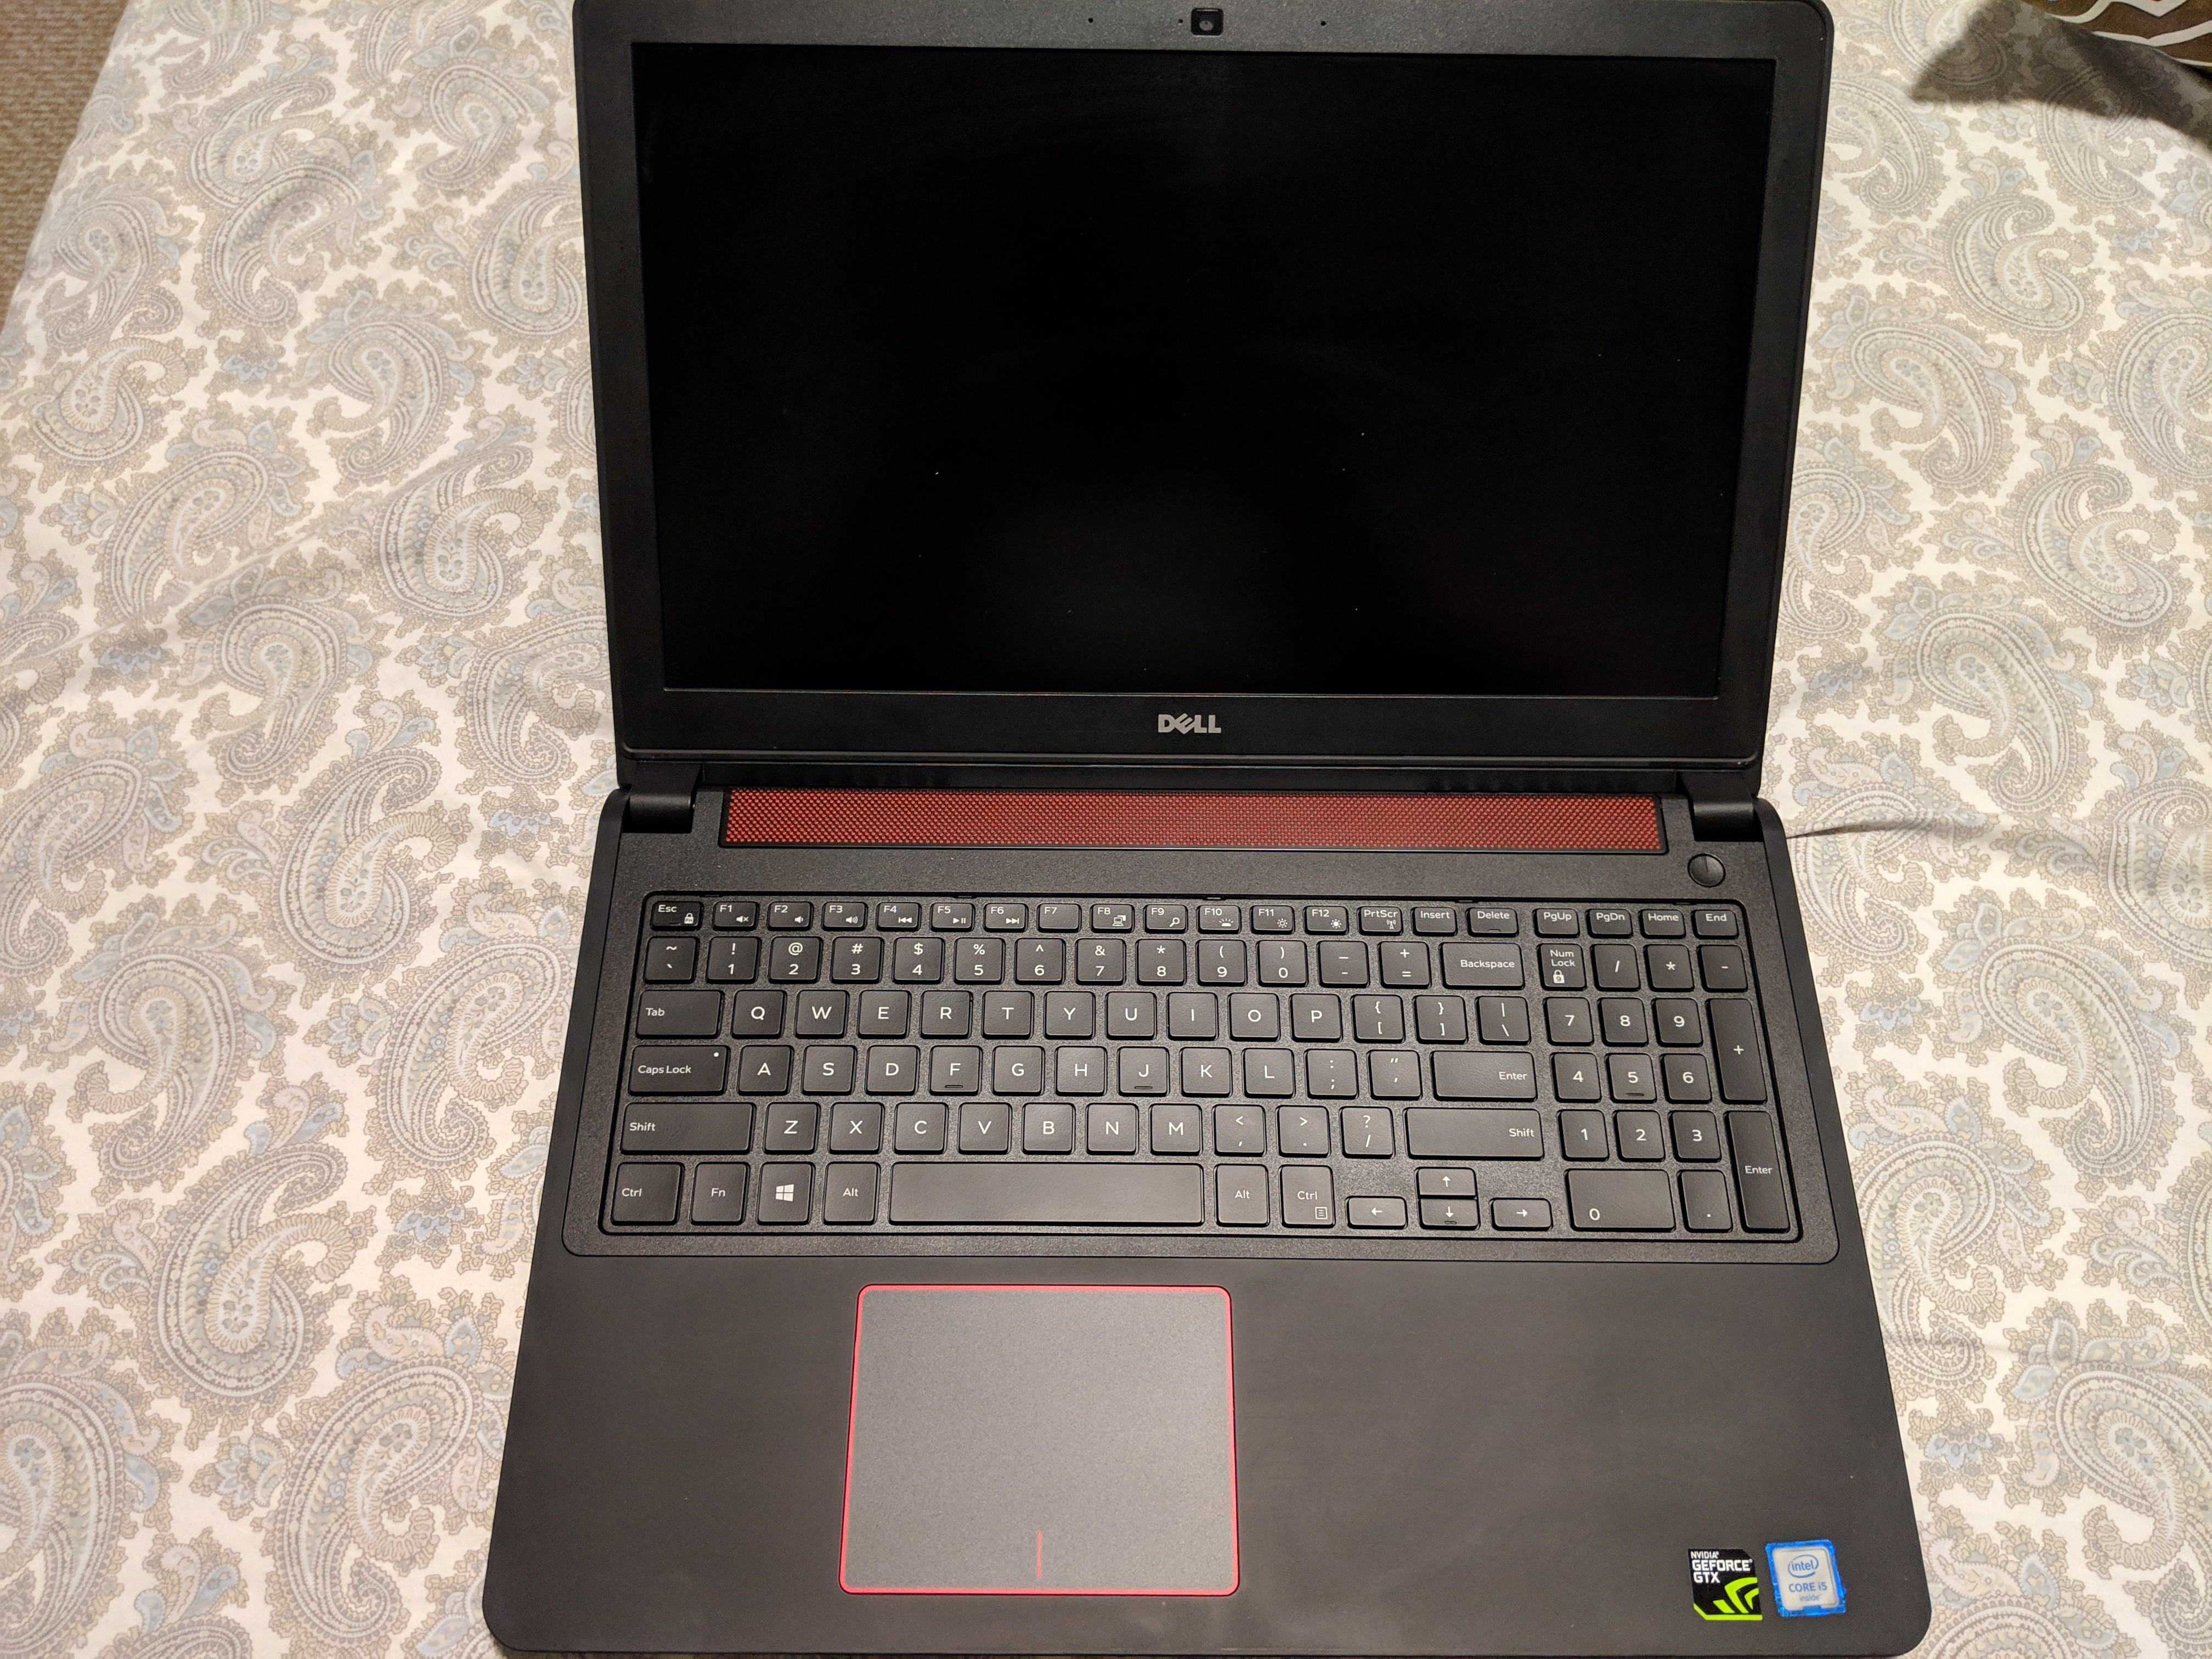 Dell Inspiron 15 7559 gaming laptop For Sale | HeatWare.com